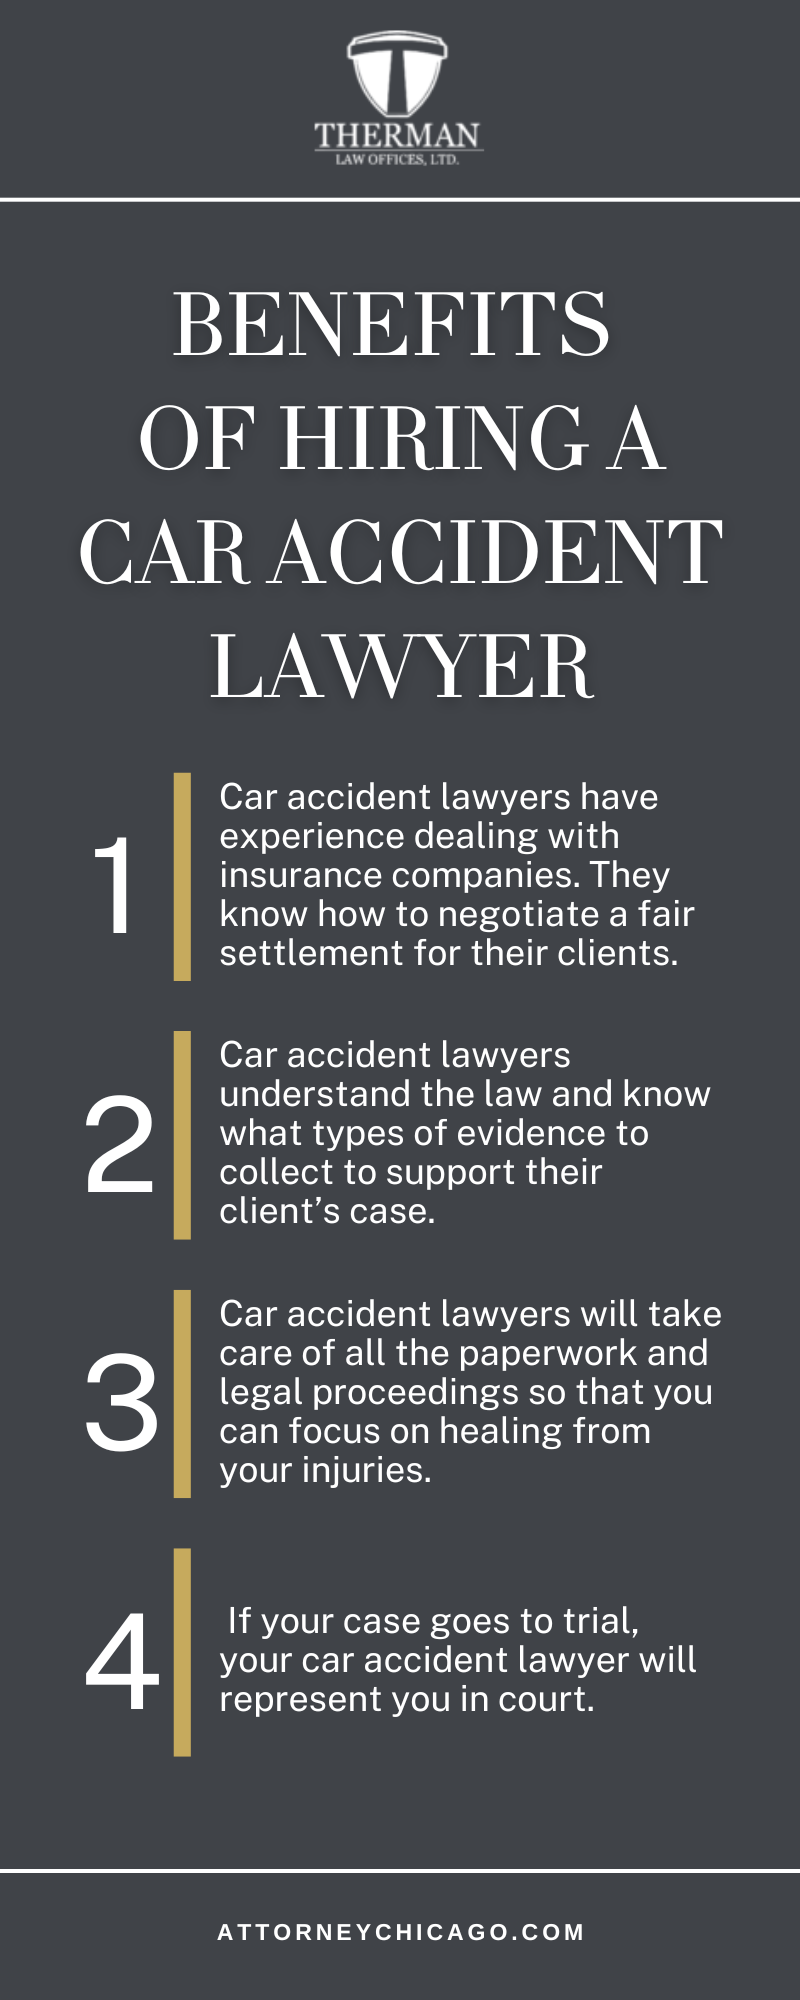 Benefits Of Hiring A Car Accident Lawyer Infographic